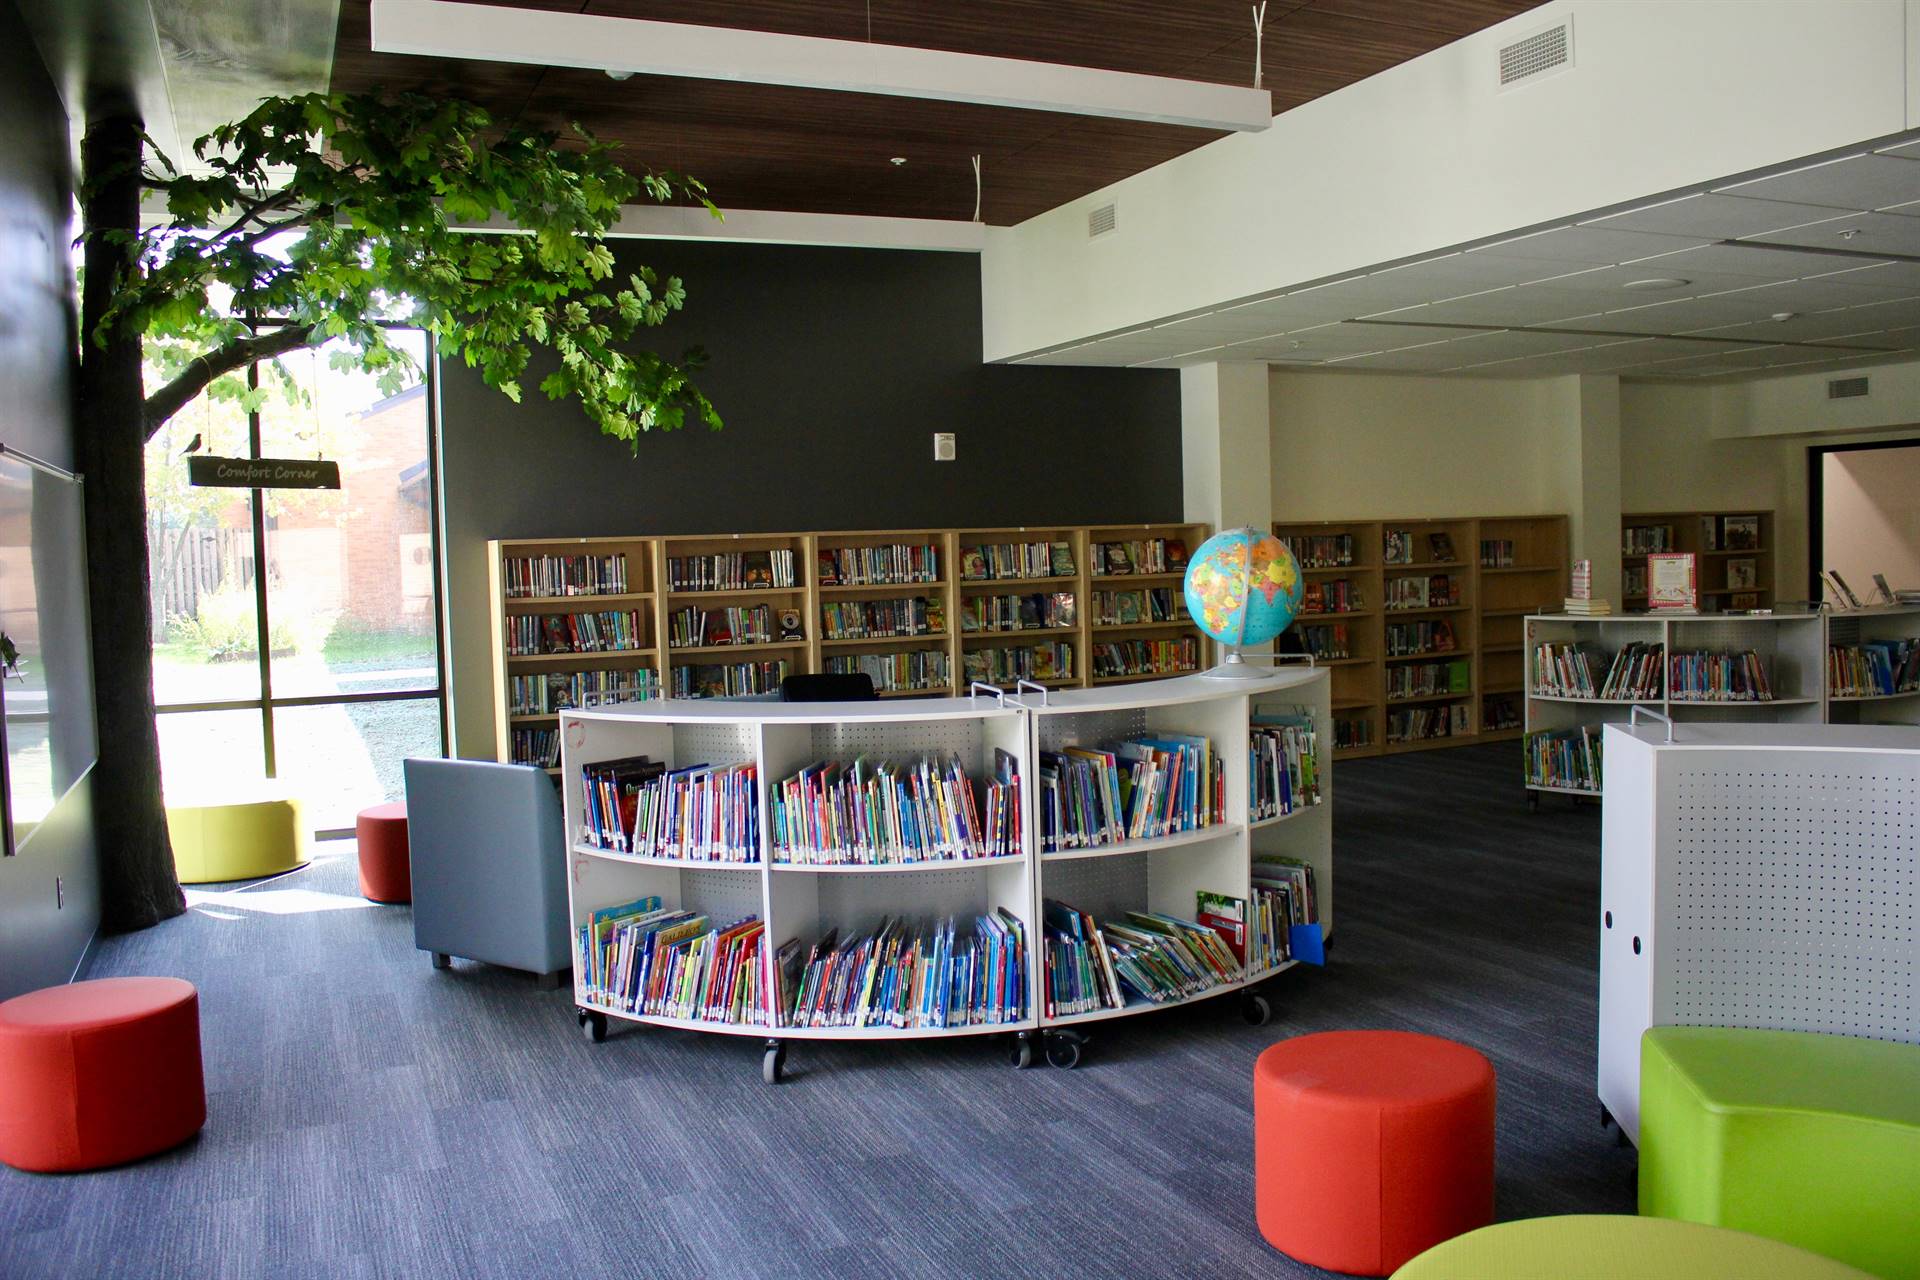 A photo of shelves of books, small colorful stools and a tree sculpture inside the media center